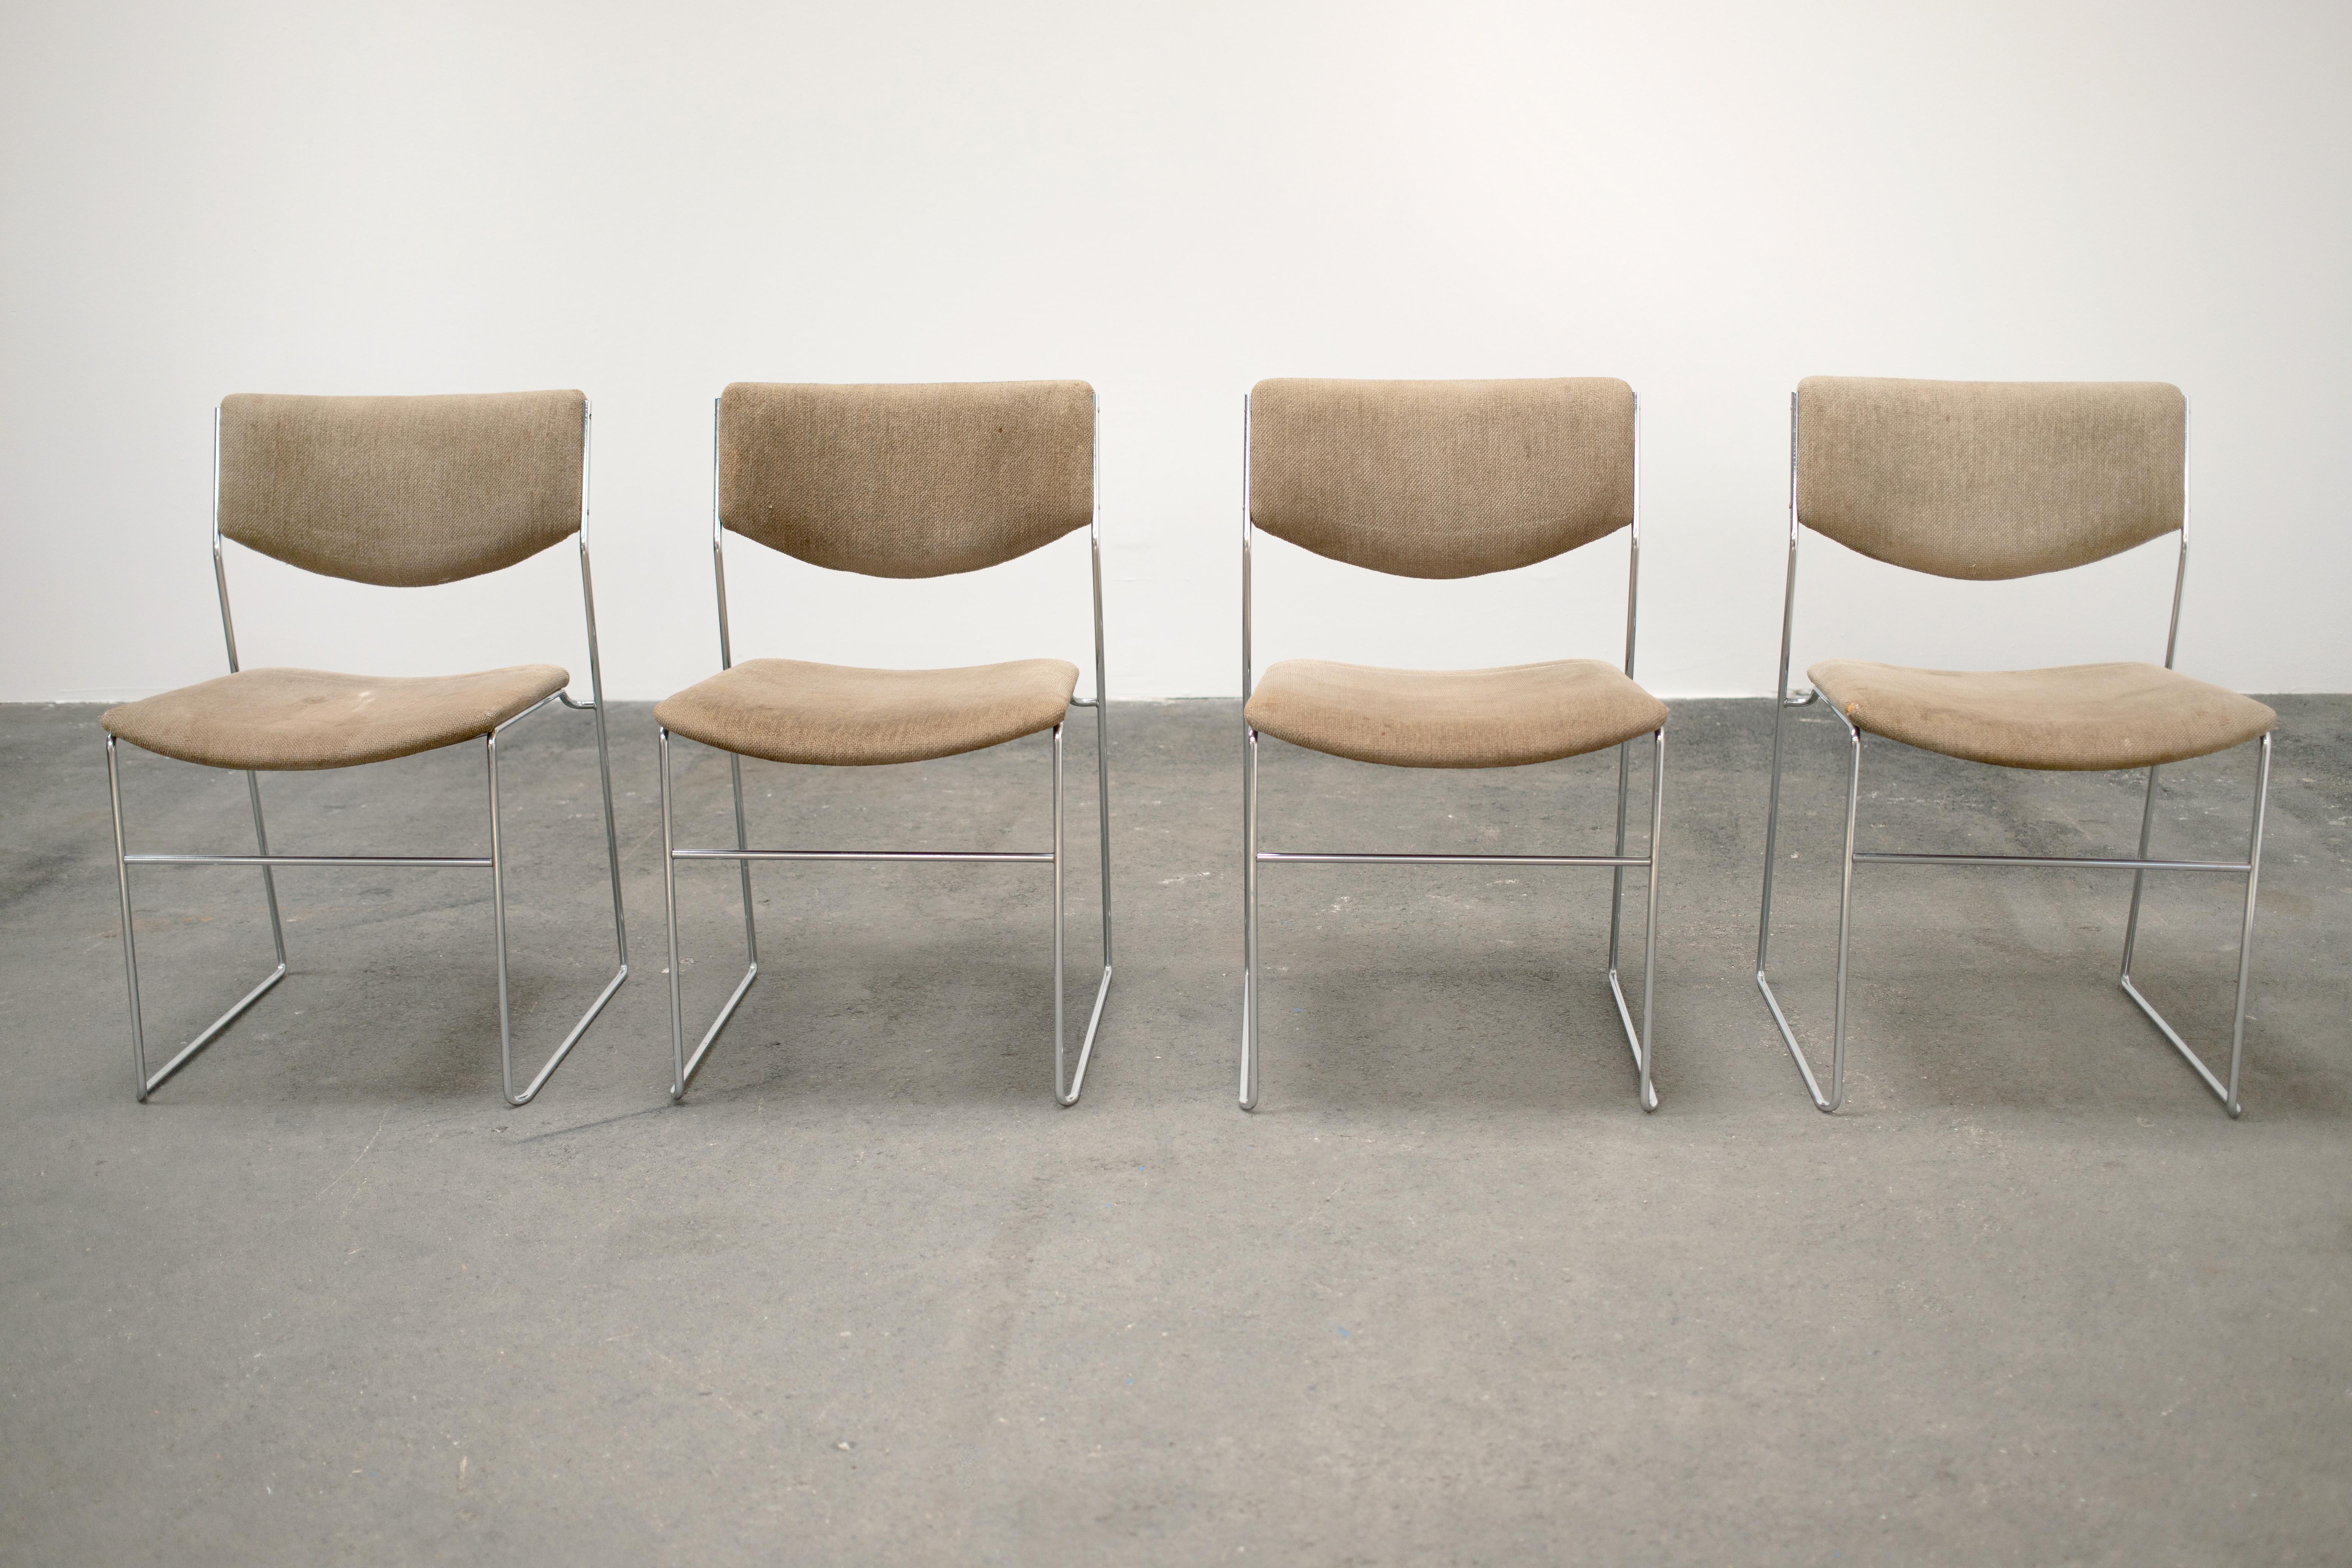 Set of 4 Mid-Century Modern dining Chairs designed by Kazuhide Takahama in the late 1960's for Gavina. The Chairs are stackable and are made with a welded steel bar frame that is chrome plated. Extremely elegant and classy design.

This set is in